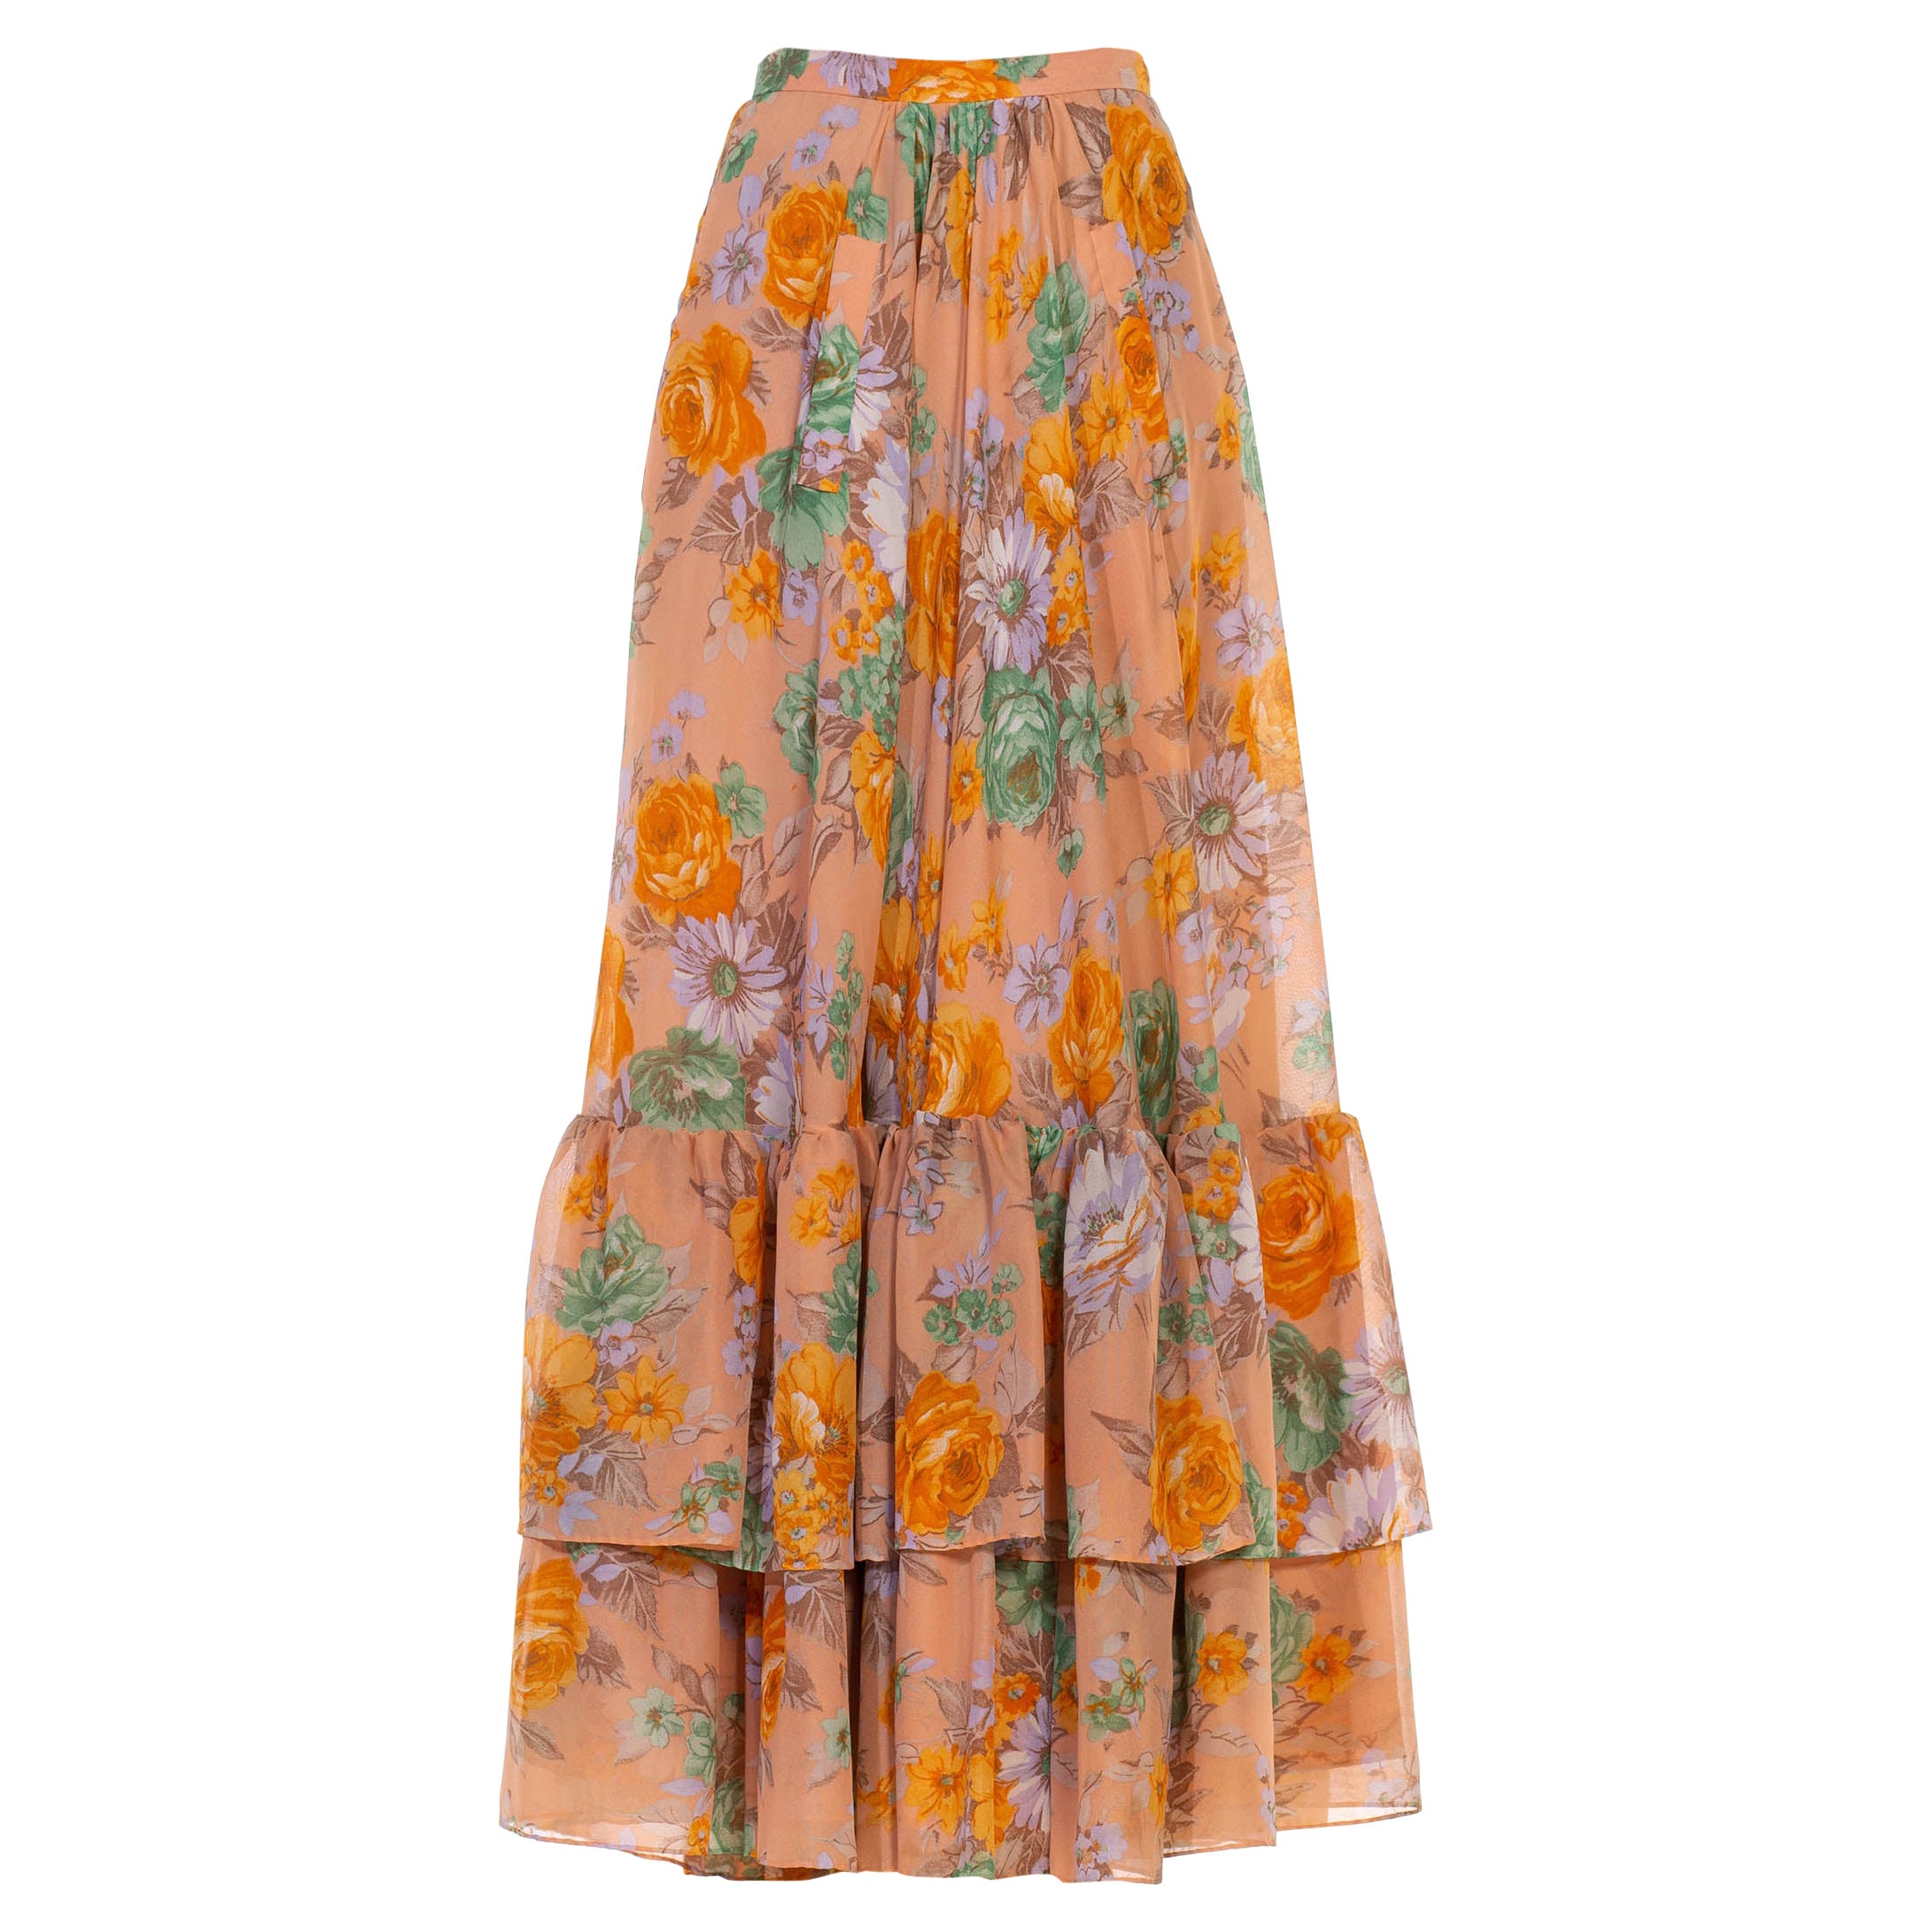 1970S Dusty Pink Orange & Green Floral Tiered Ruffle Skirt